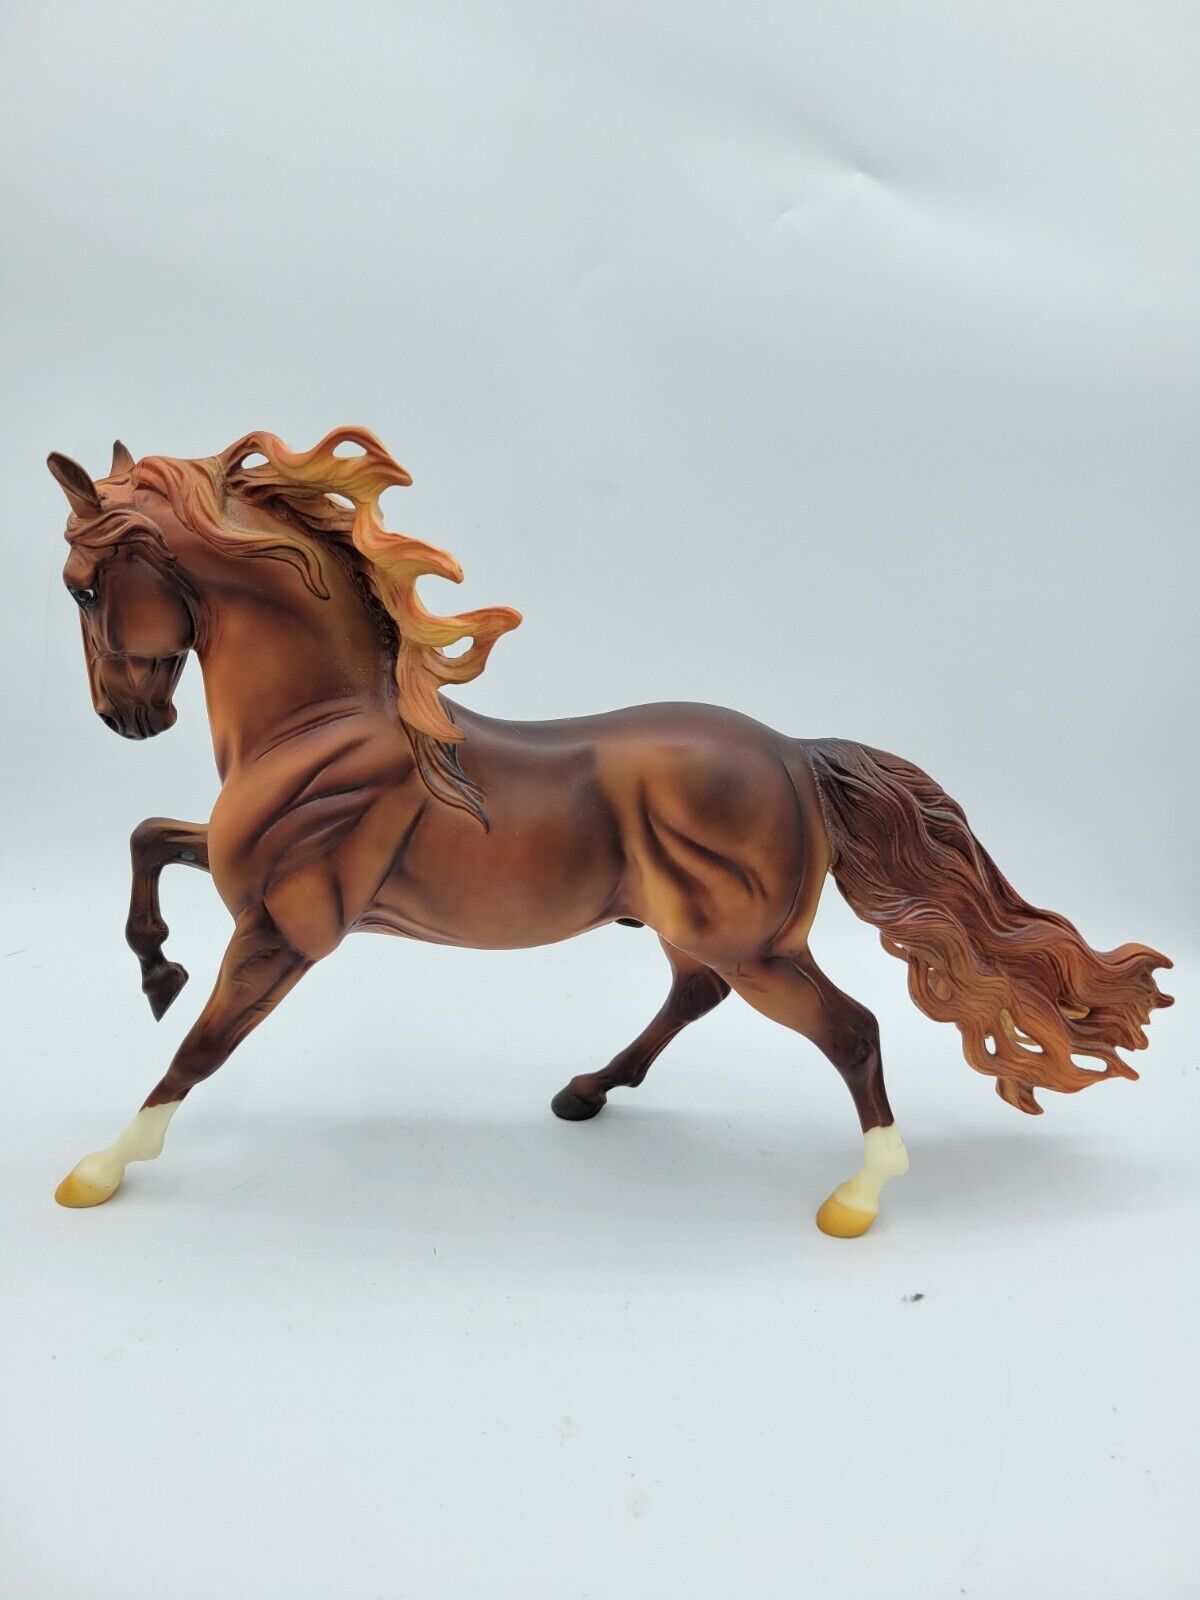 Breyer West Model Horse CALIENTE 2008 Limited Edition Tour Chestnut Andalusian